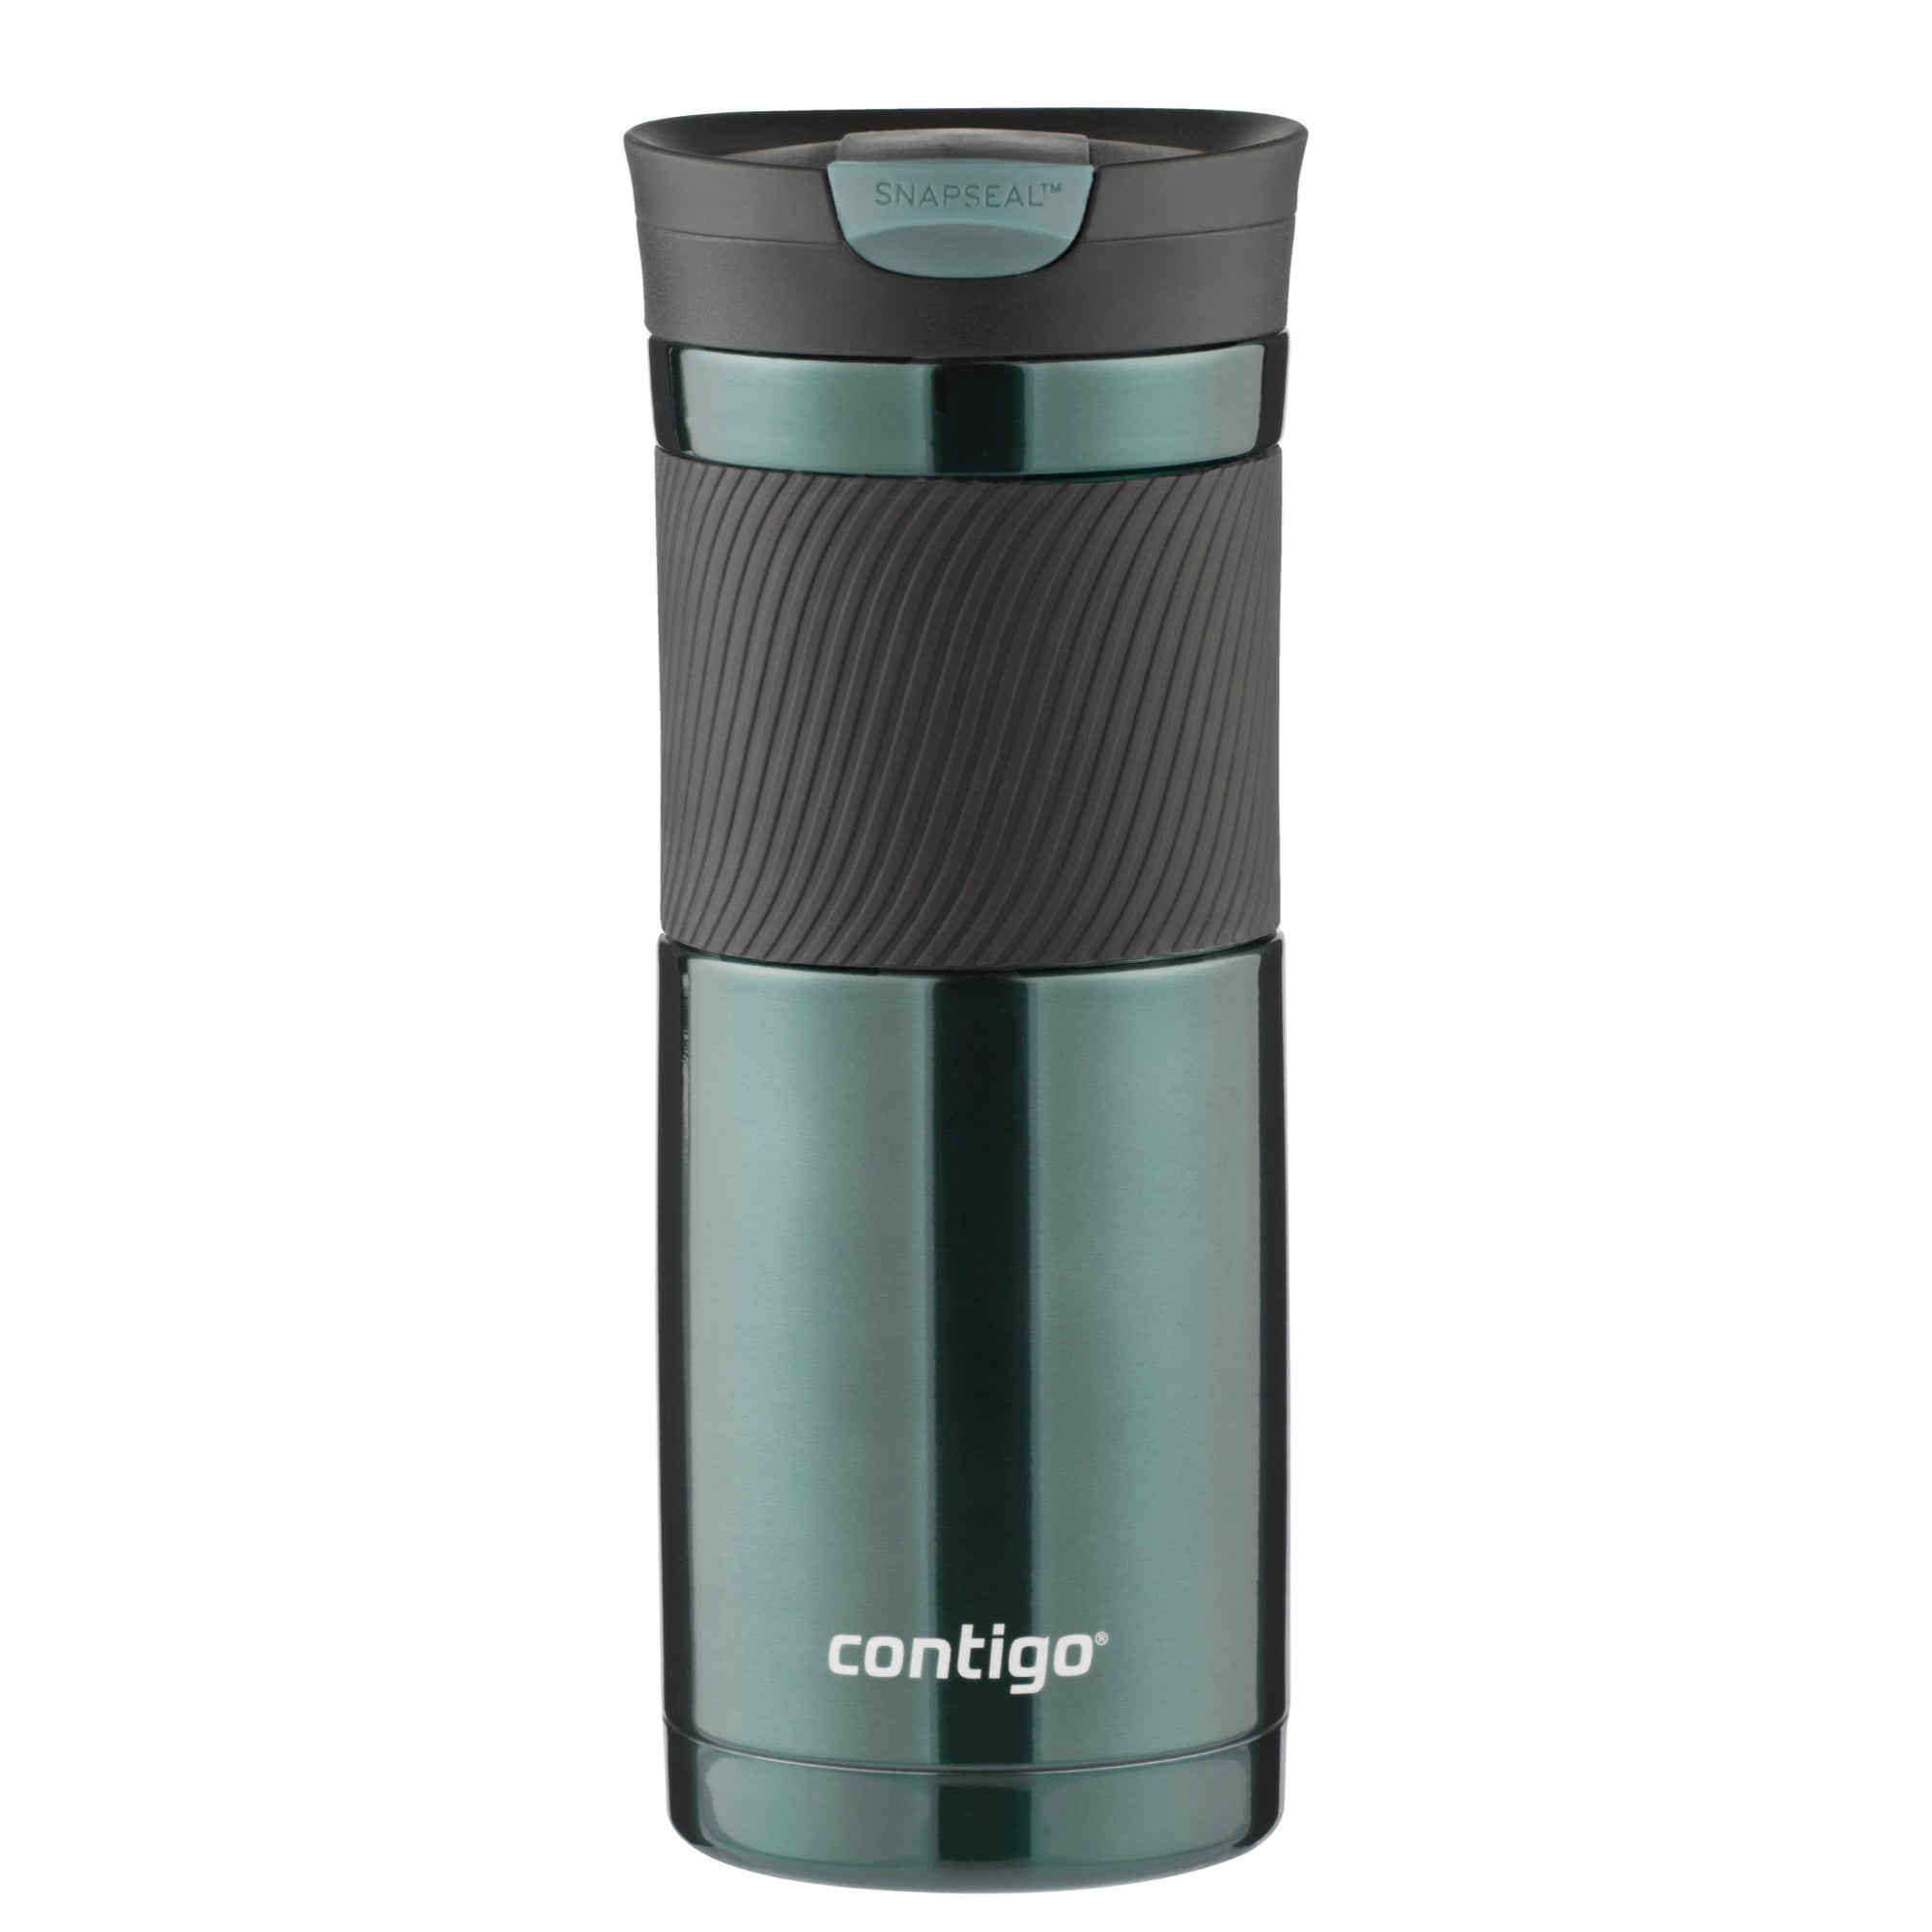  Contigo SnapSeal Byron Vacuum-Insulated Stainless Steel Travel  Mug, 16 oz, Radiant Orchid and Stormy Weather : Home & Kitchen